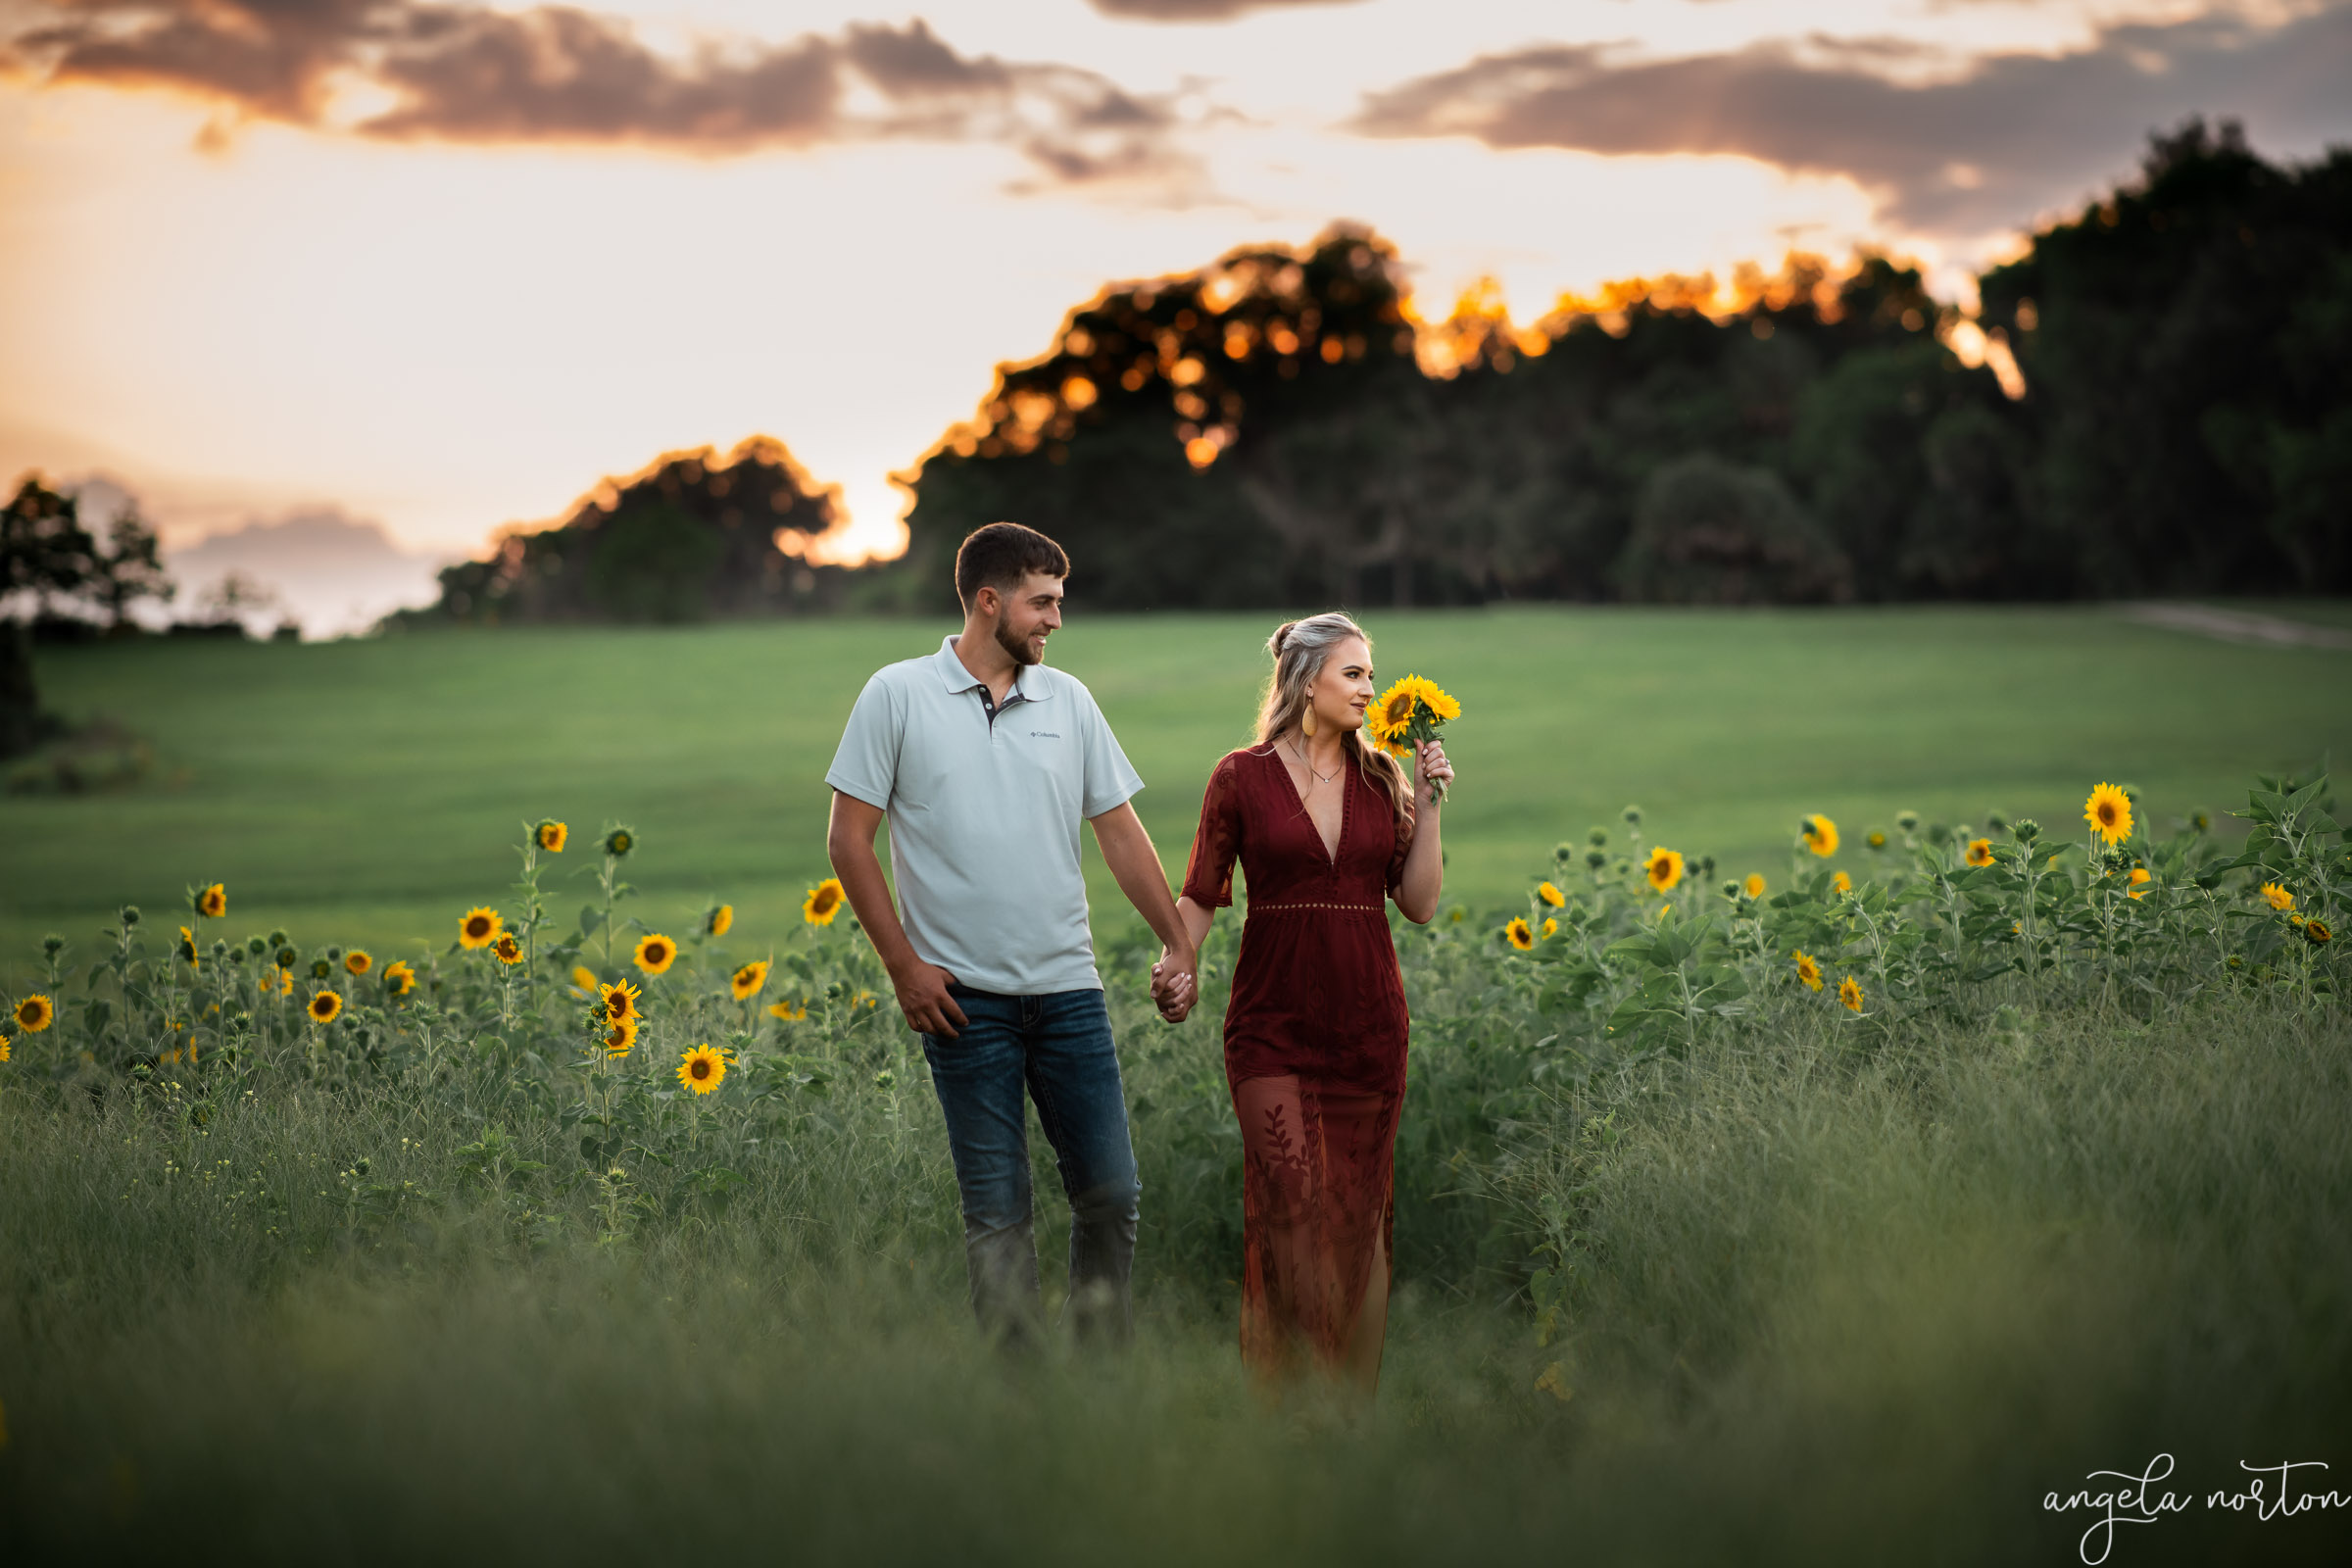 A sunset engagement session in a sunflower field in Micanopy Florida by Angela Norton.